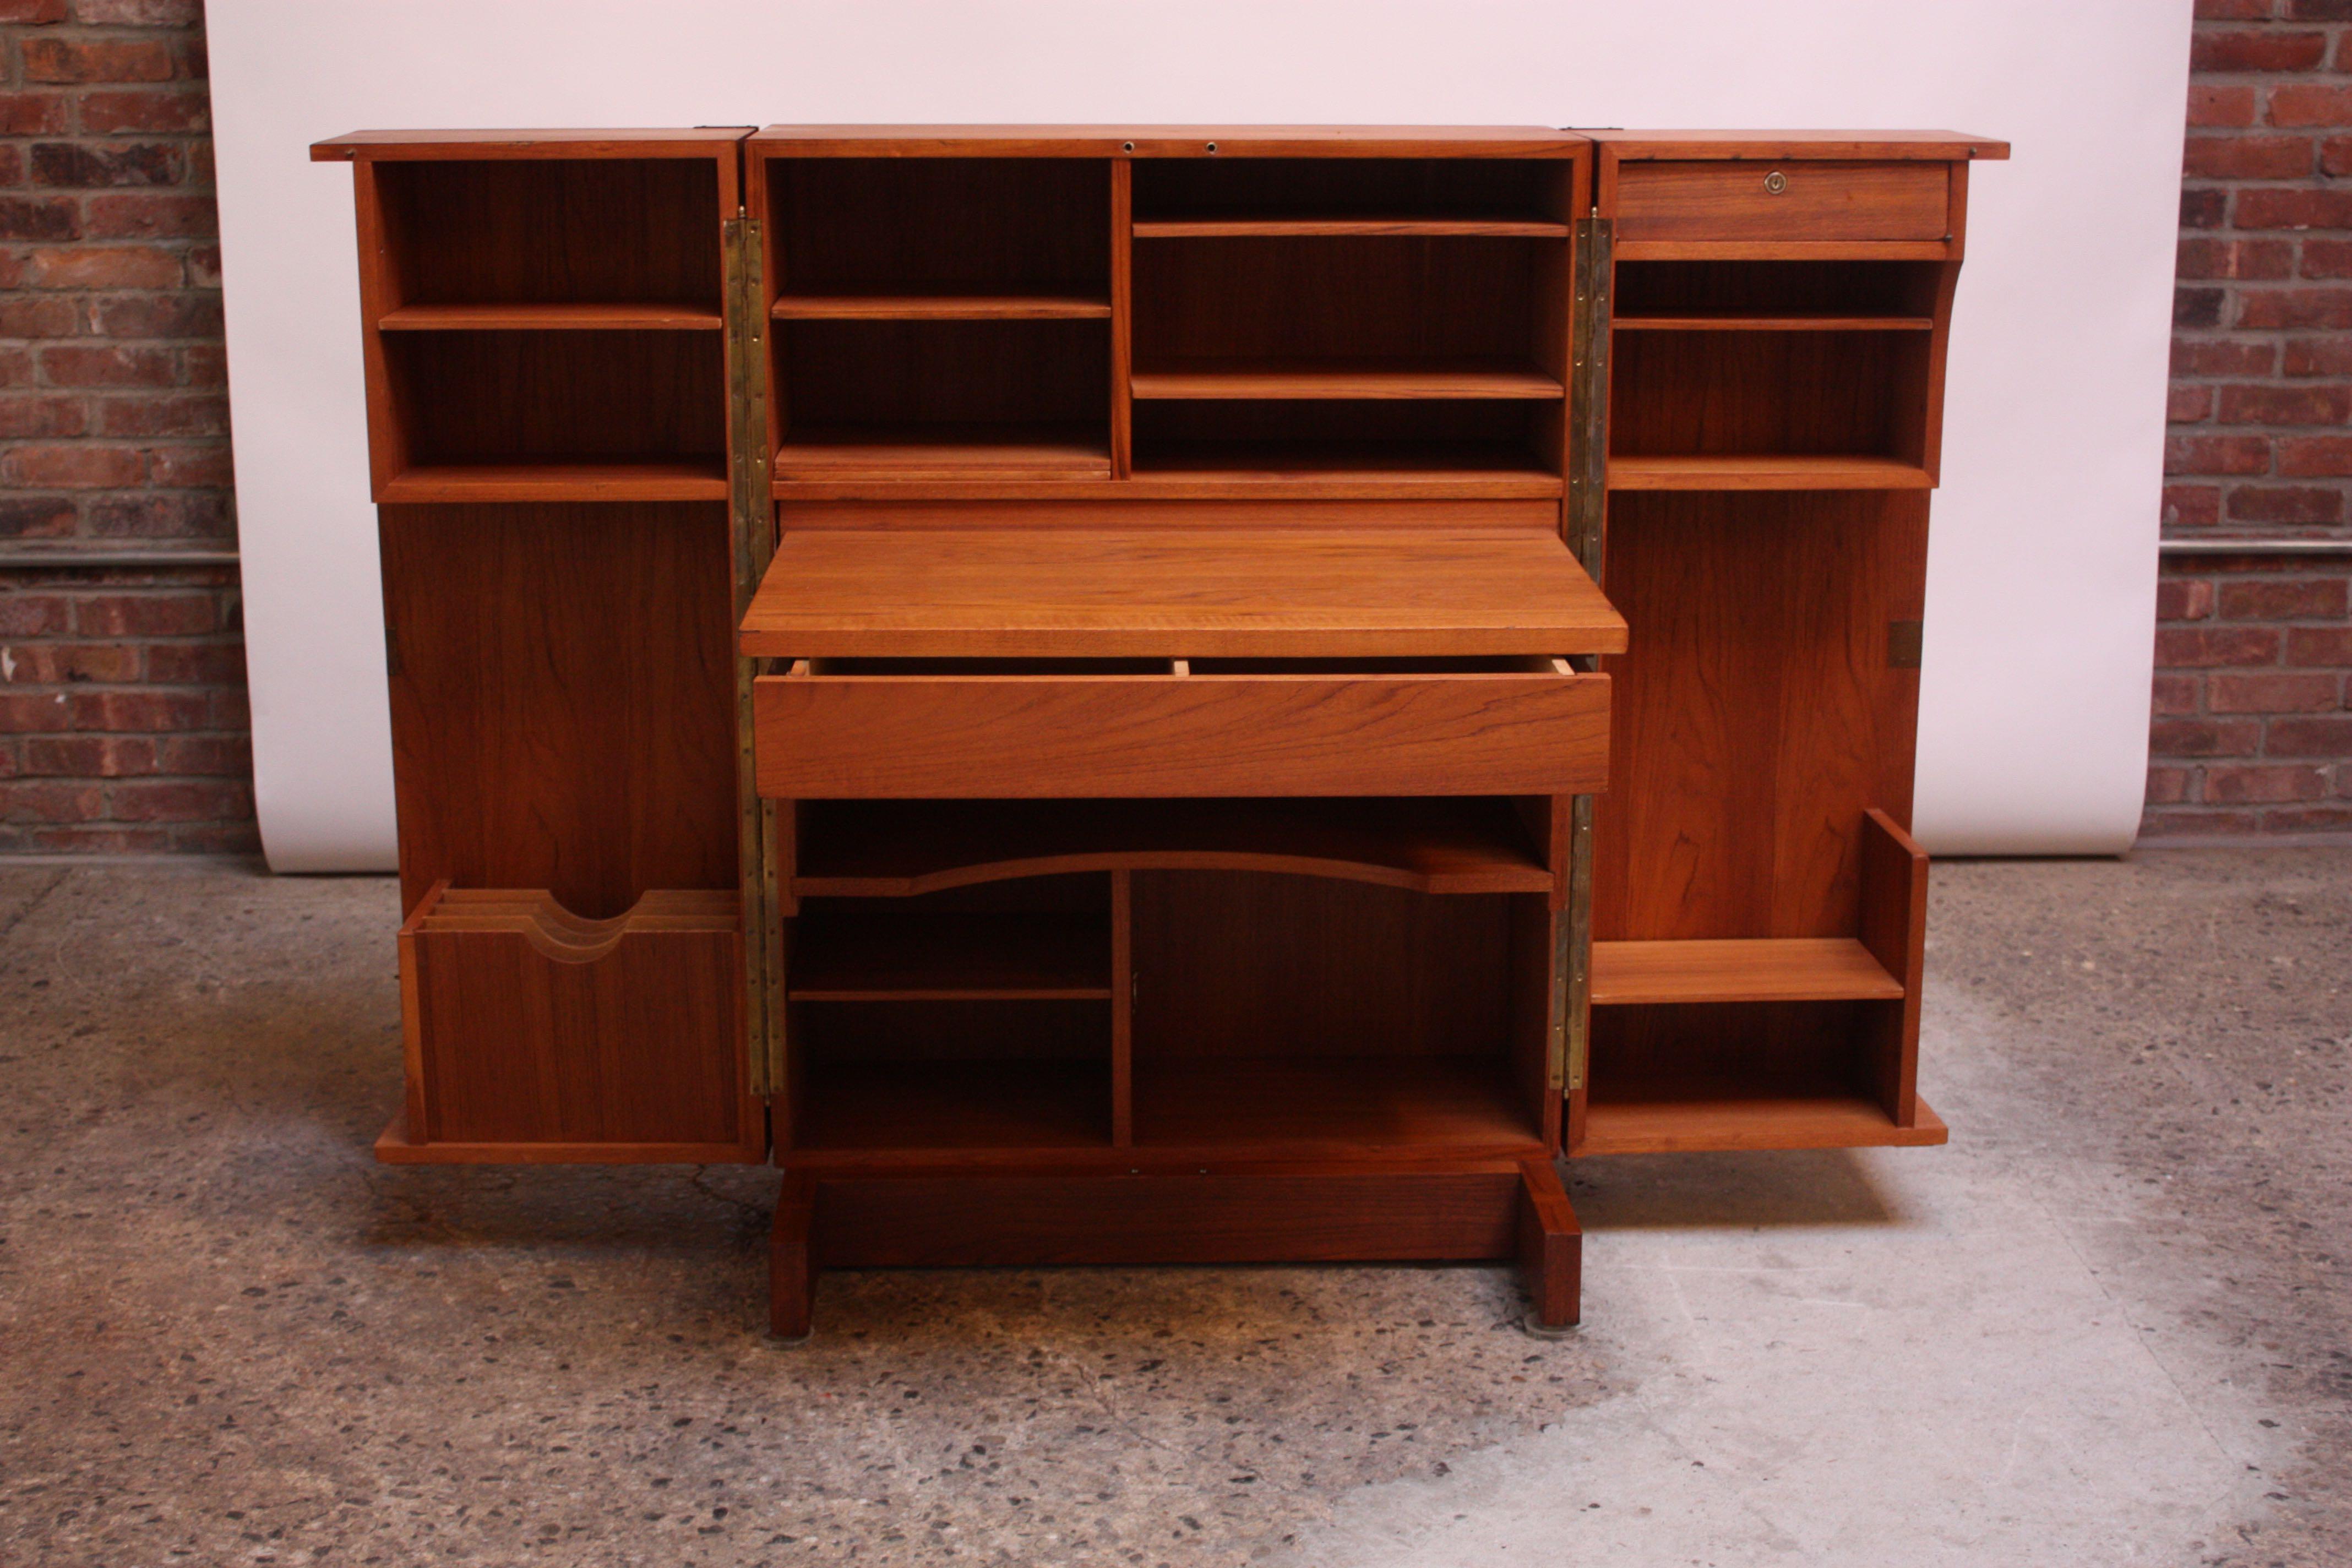 Ingeniously designed Danish modern teak cabinet finished with brass corners, whose hinged doors open to reveal a full work station. Features a slide out desk top / work surface with drawer underneath, multiple shelves / storage cubbies, a filing